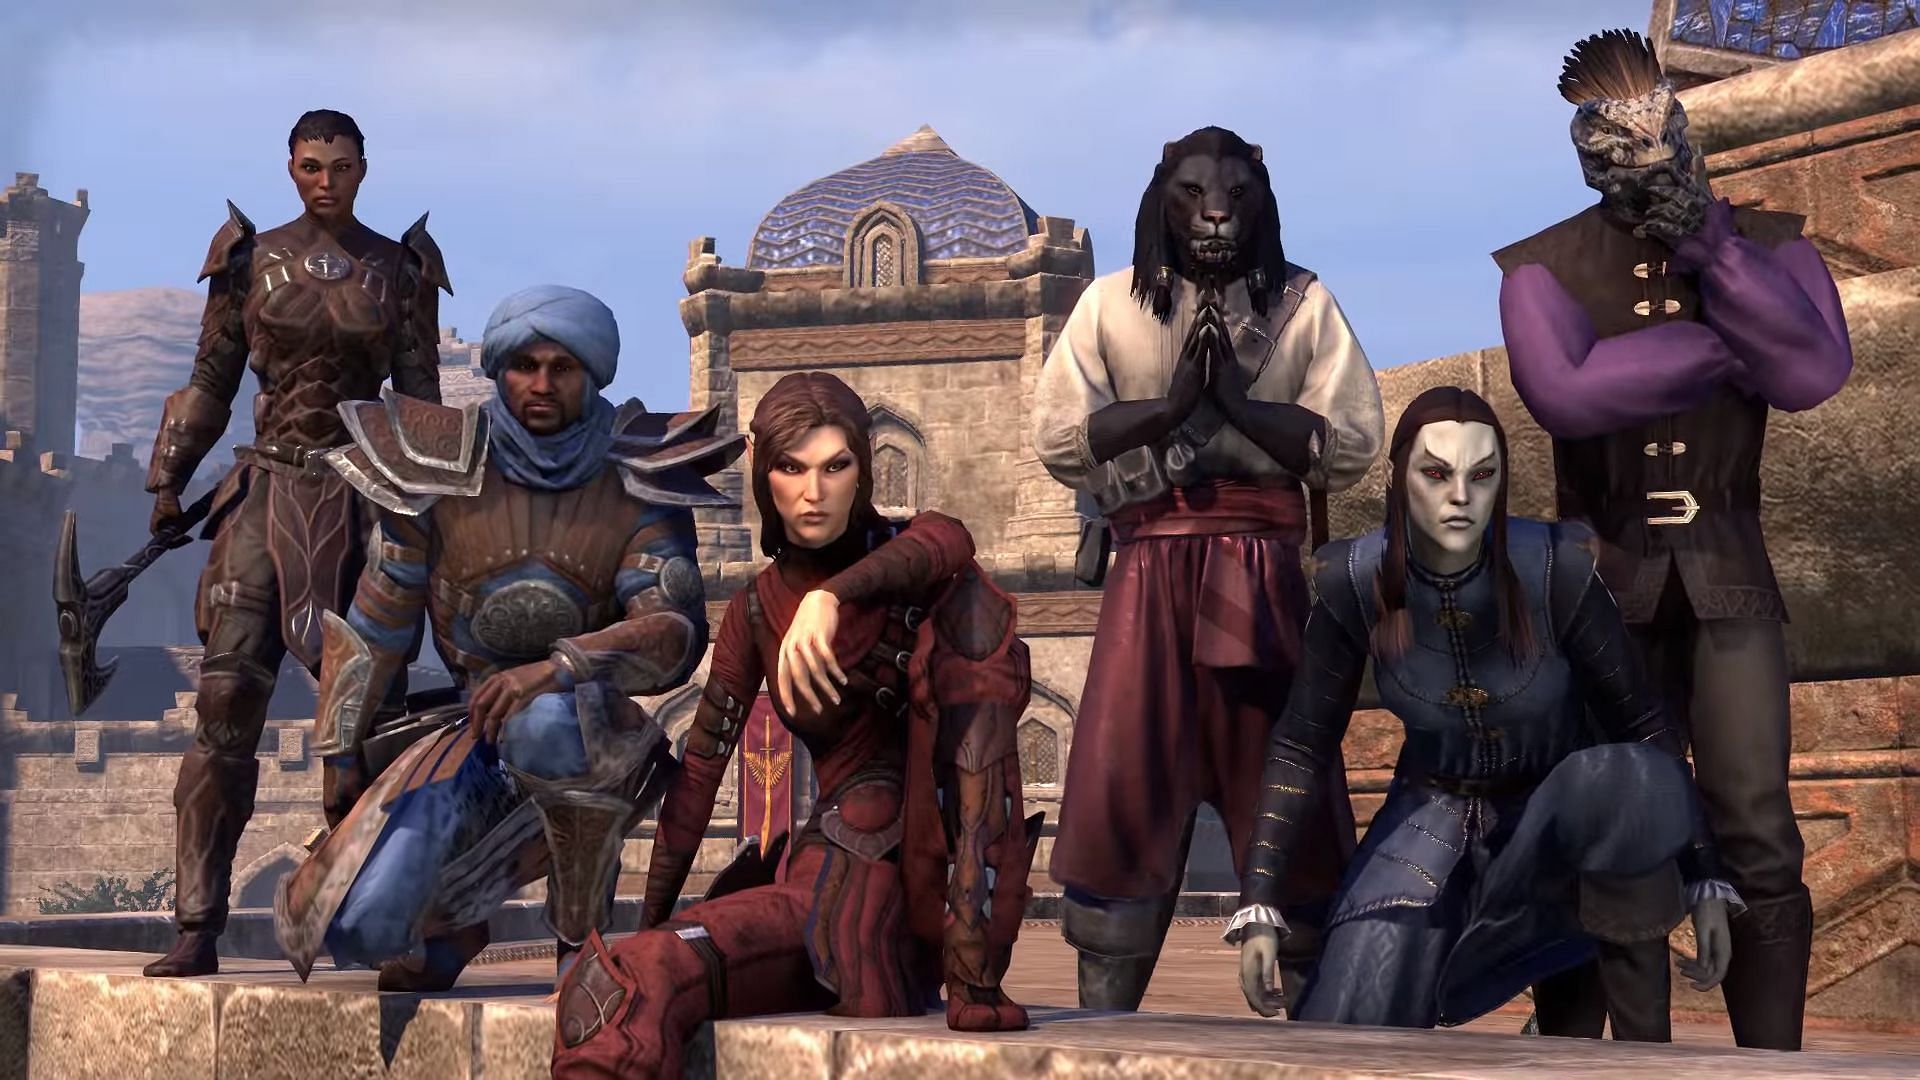 The Thieves Guild is for people who want to explore stealth, theft, and an exciting story (Image via ZeniMax Online Studios)